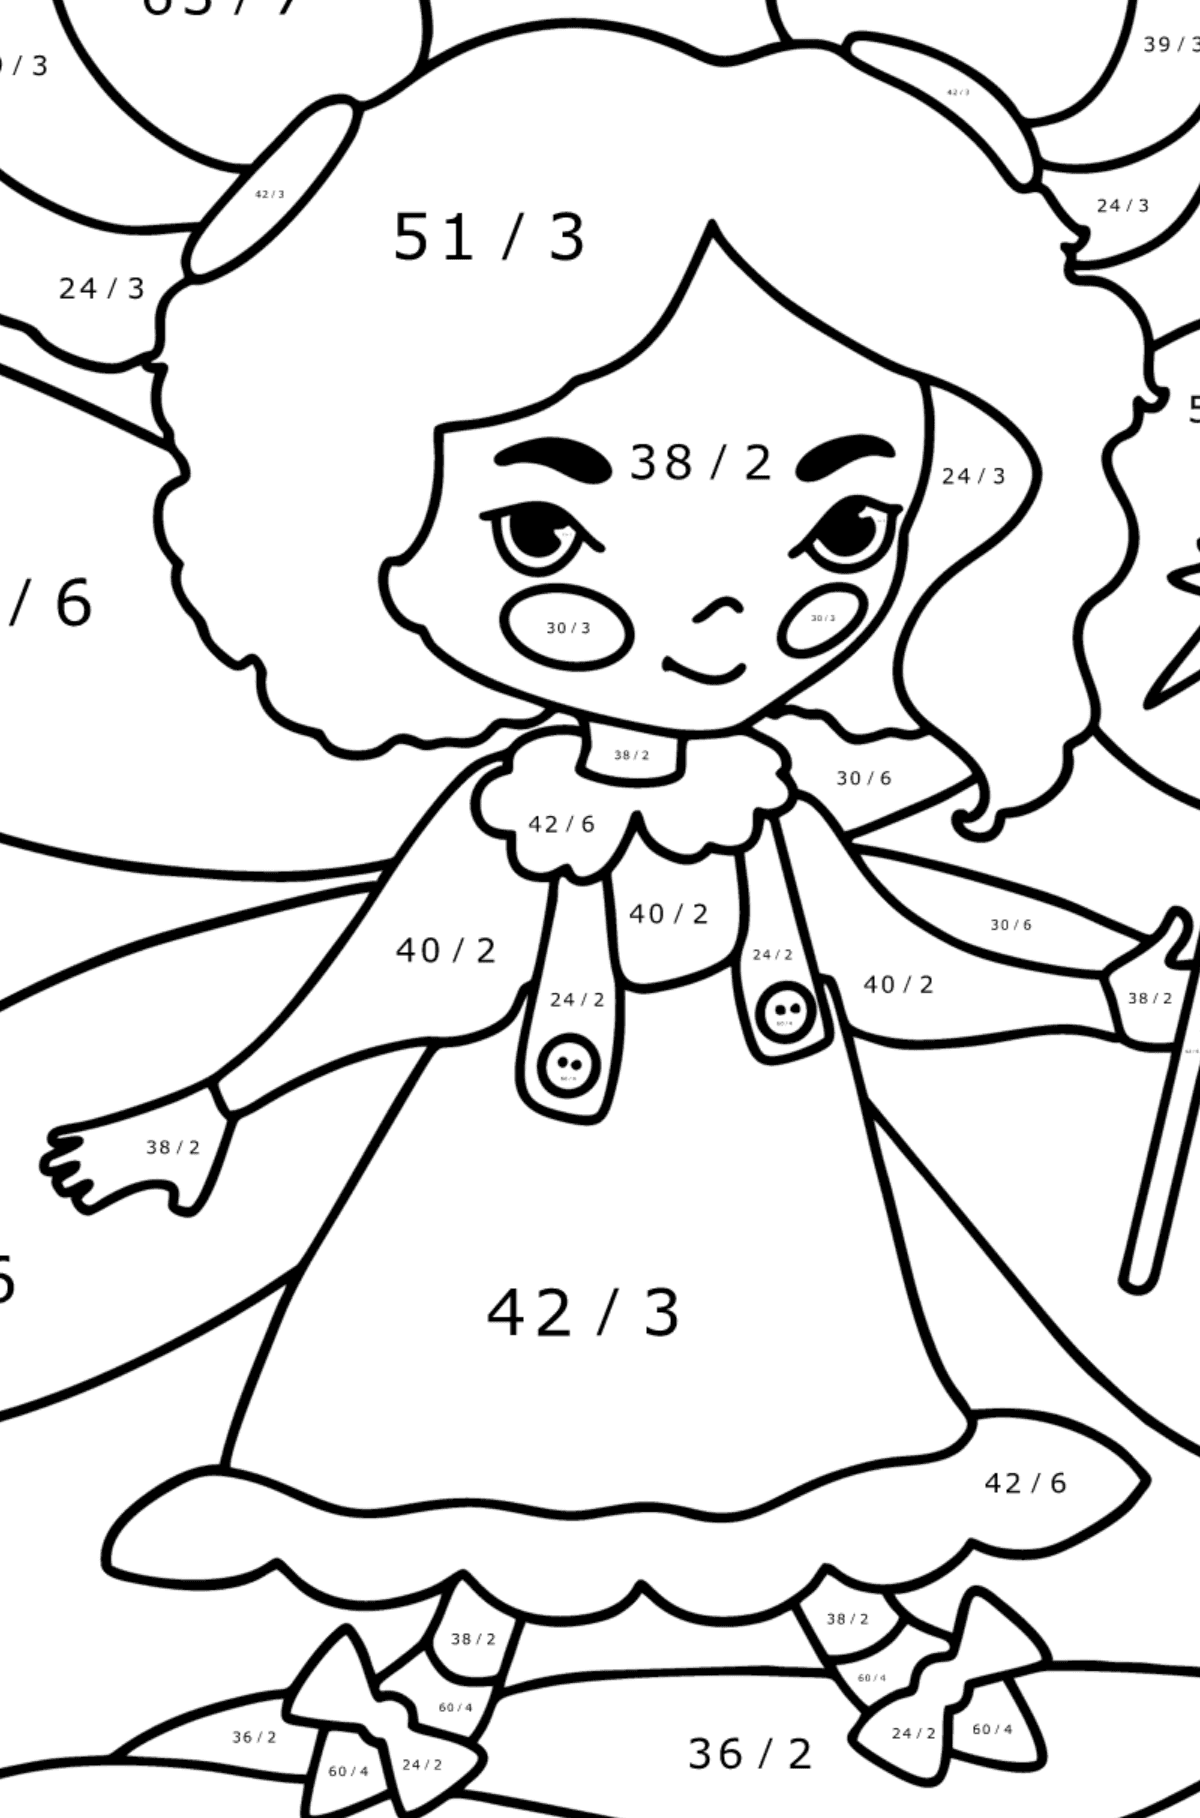 Fairy with a magic wand coloring page - Math Coloring - Division for Kids